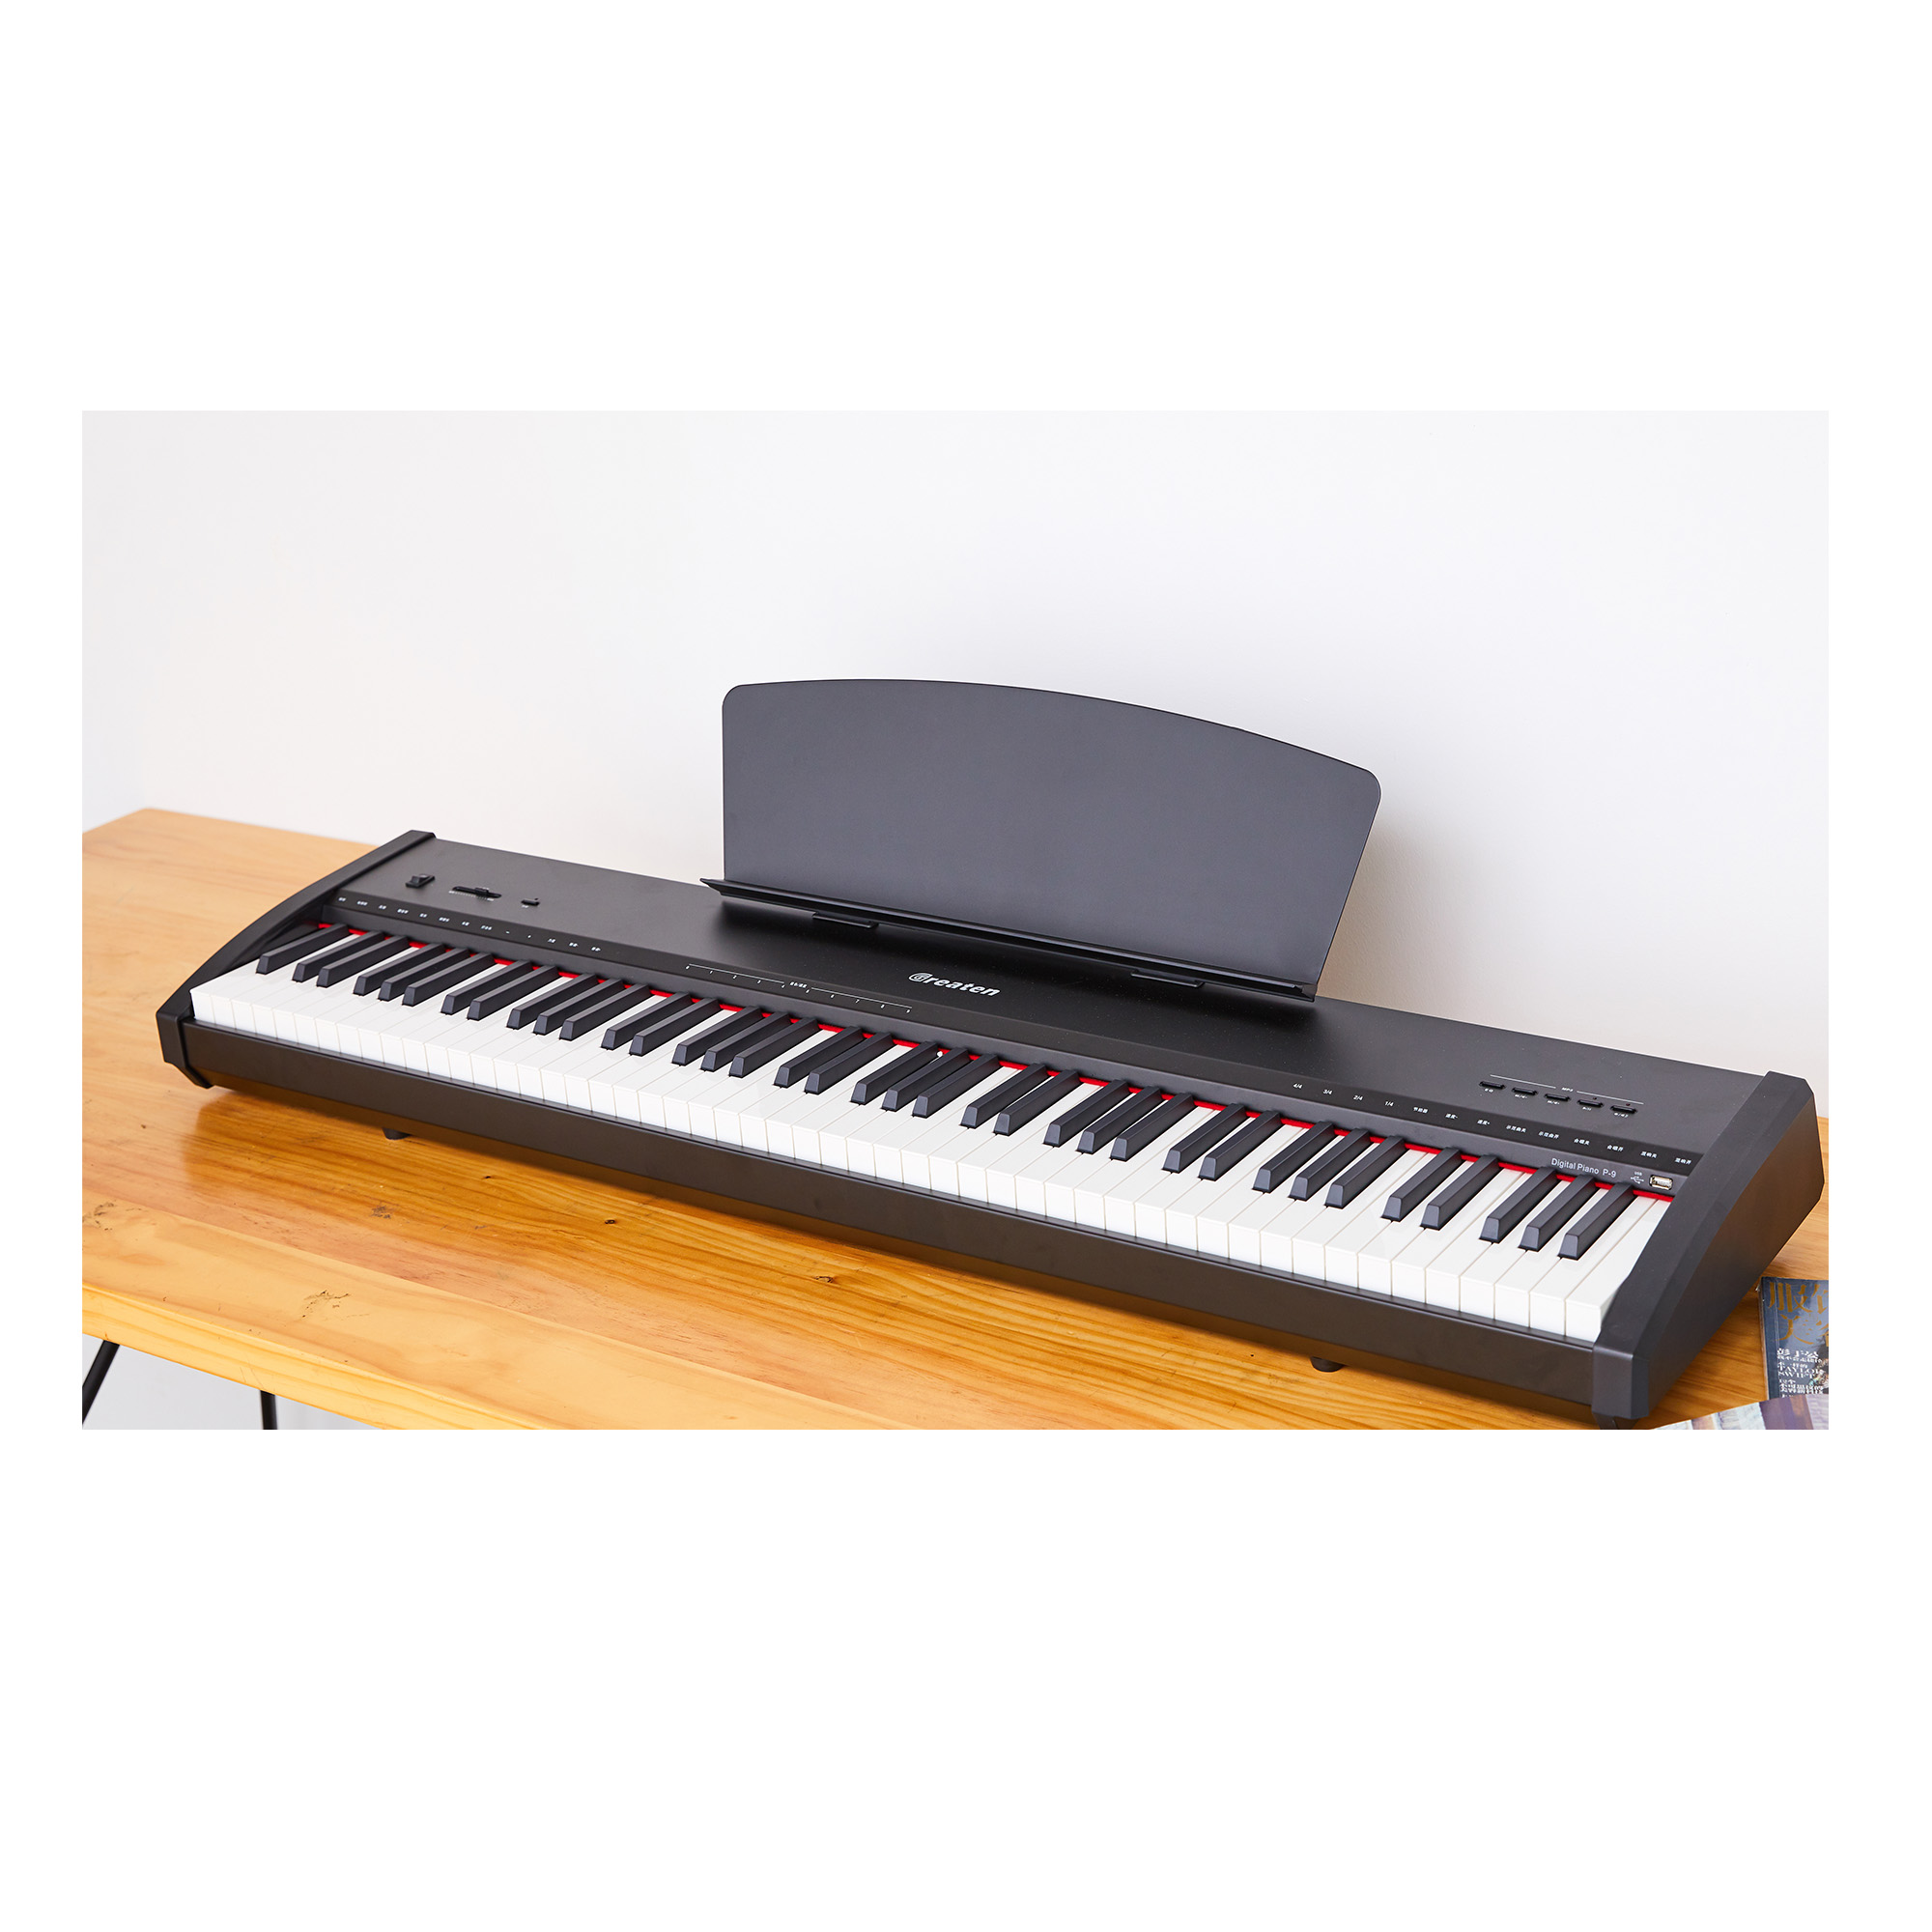 P-9: Portable Digital Piano for Beginners, Entry-level, 88 Keys, Hammer Action Keyboard, 138 Voices, 64 Polyphony